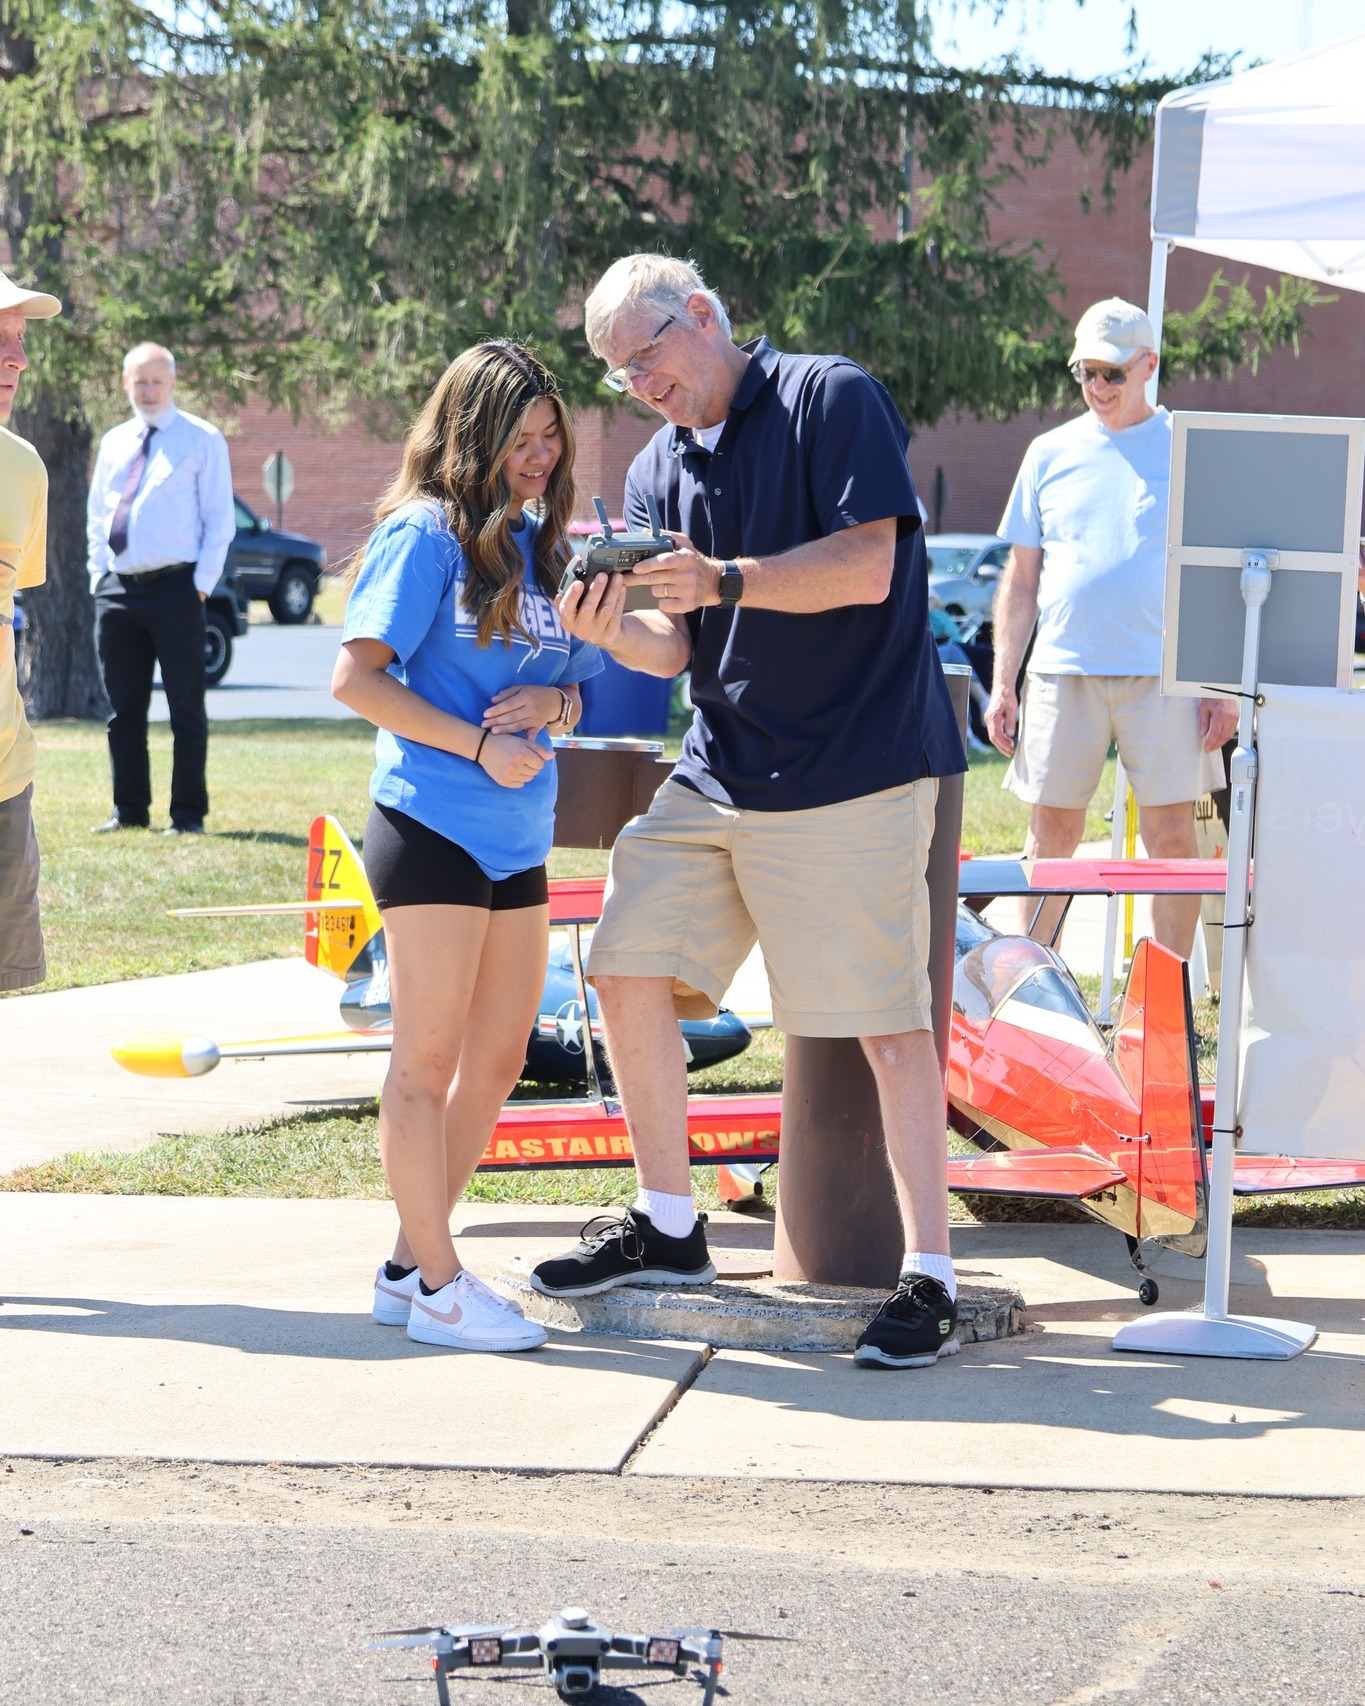 A young woman looking at a drone remote control held by a man outside